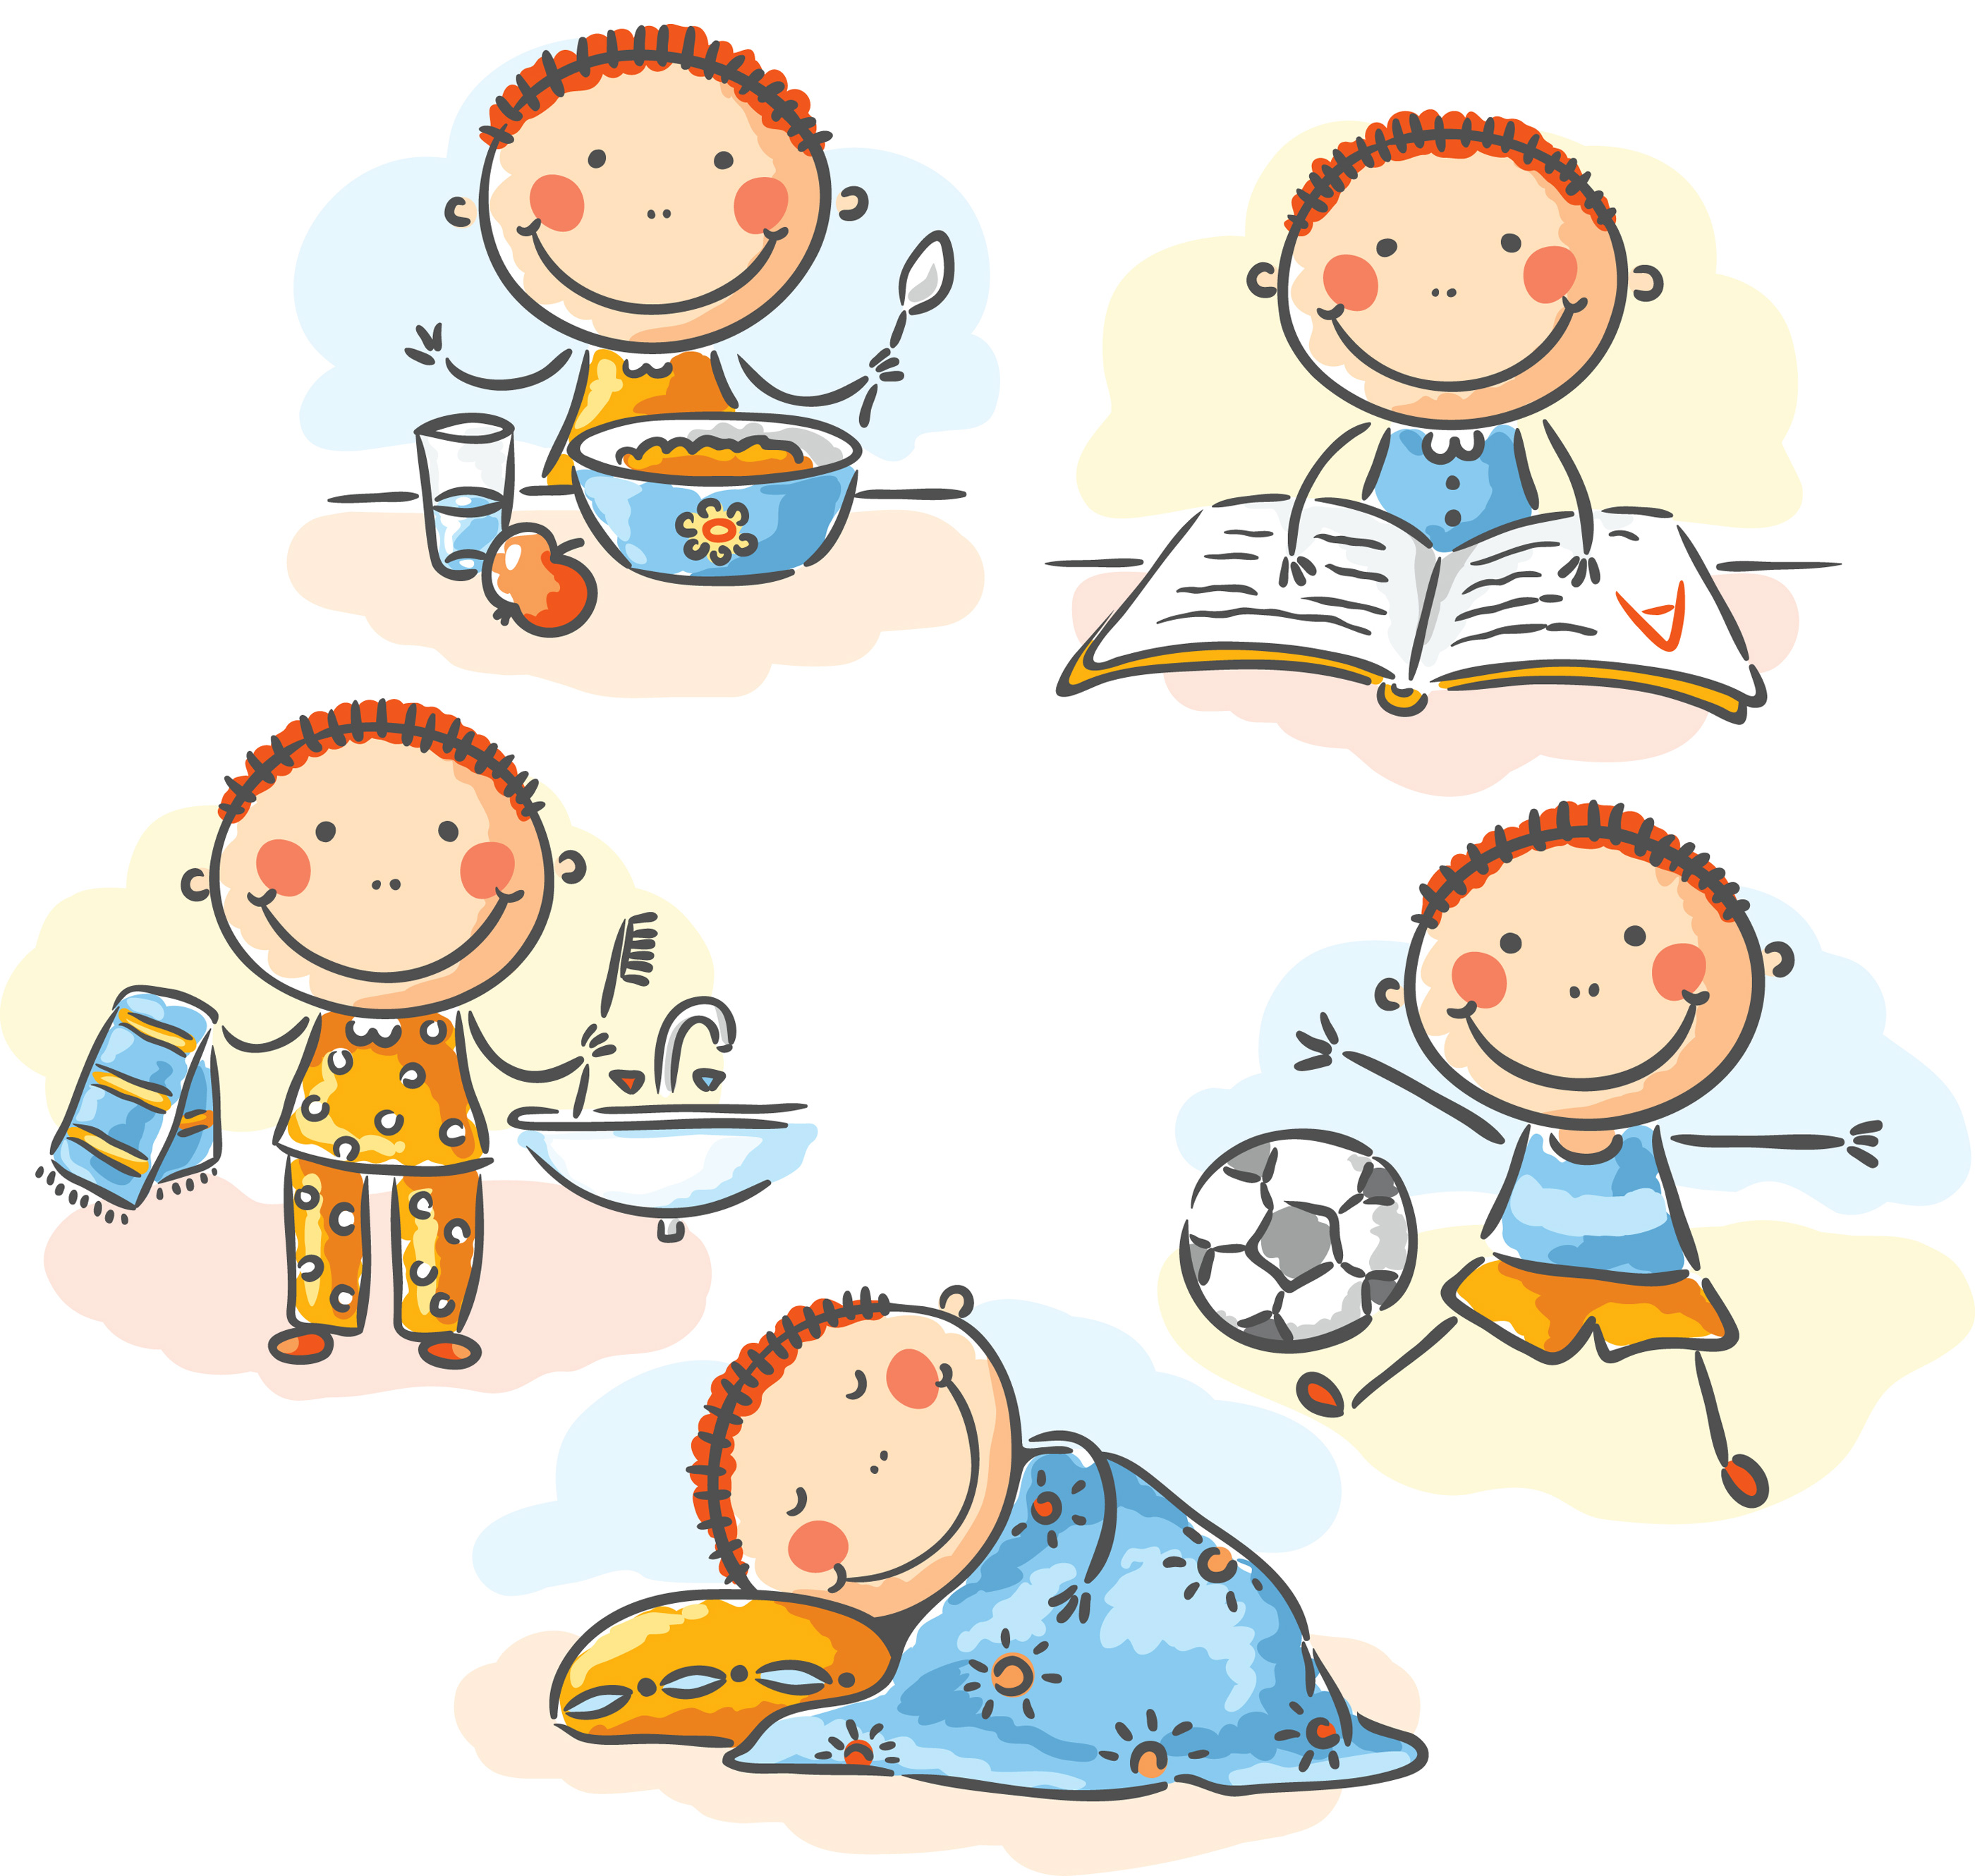 Smarter children go to. Bedtime clipart night time activity